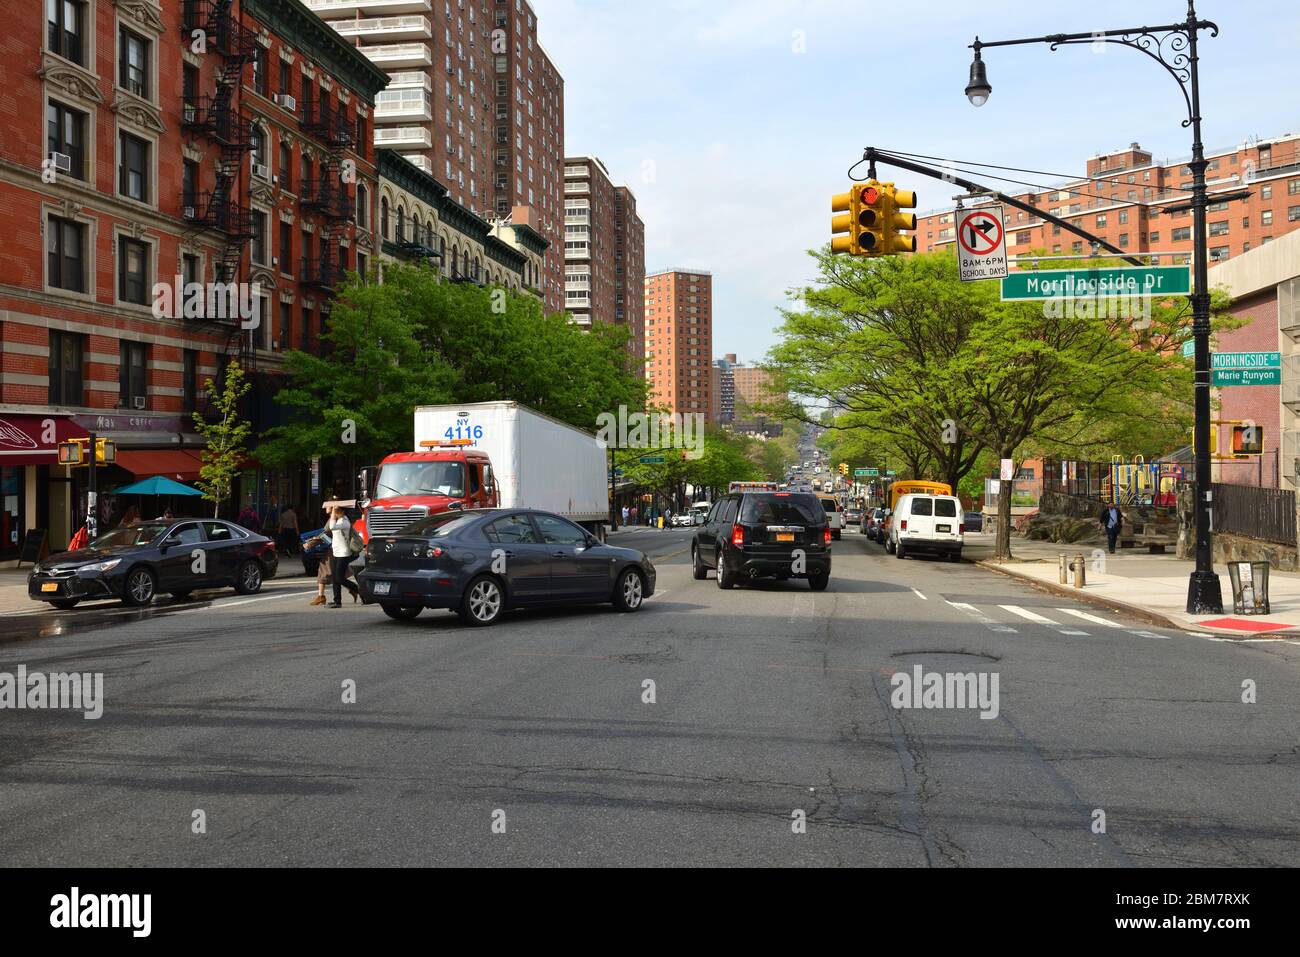 Tenth Avenue, known as Amsterdam Avenue, and Morningside Drive in spring Stock Photo